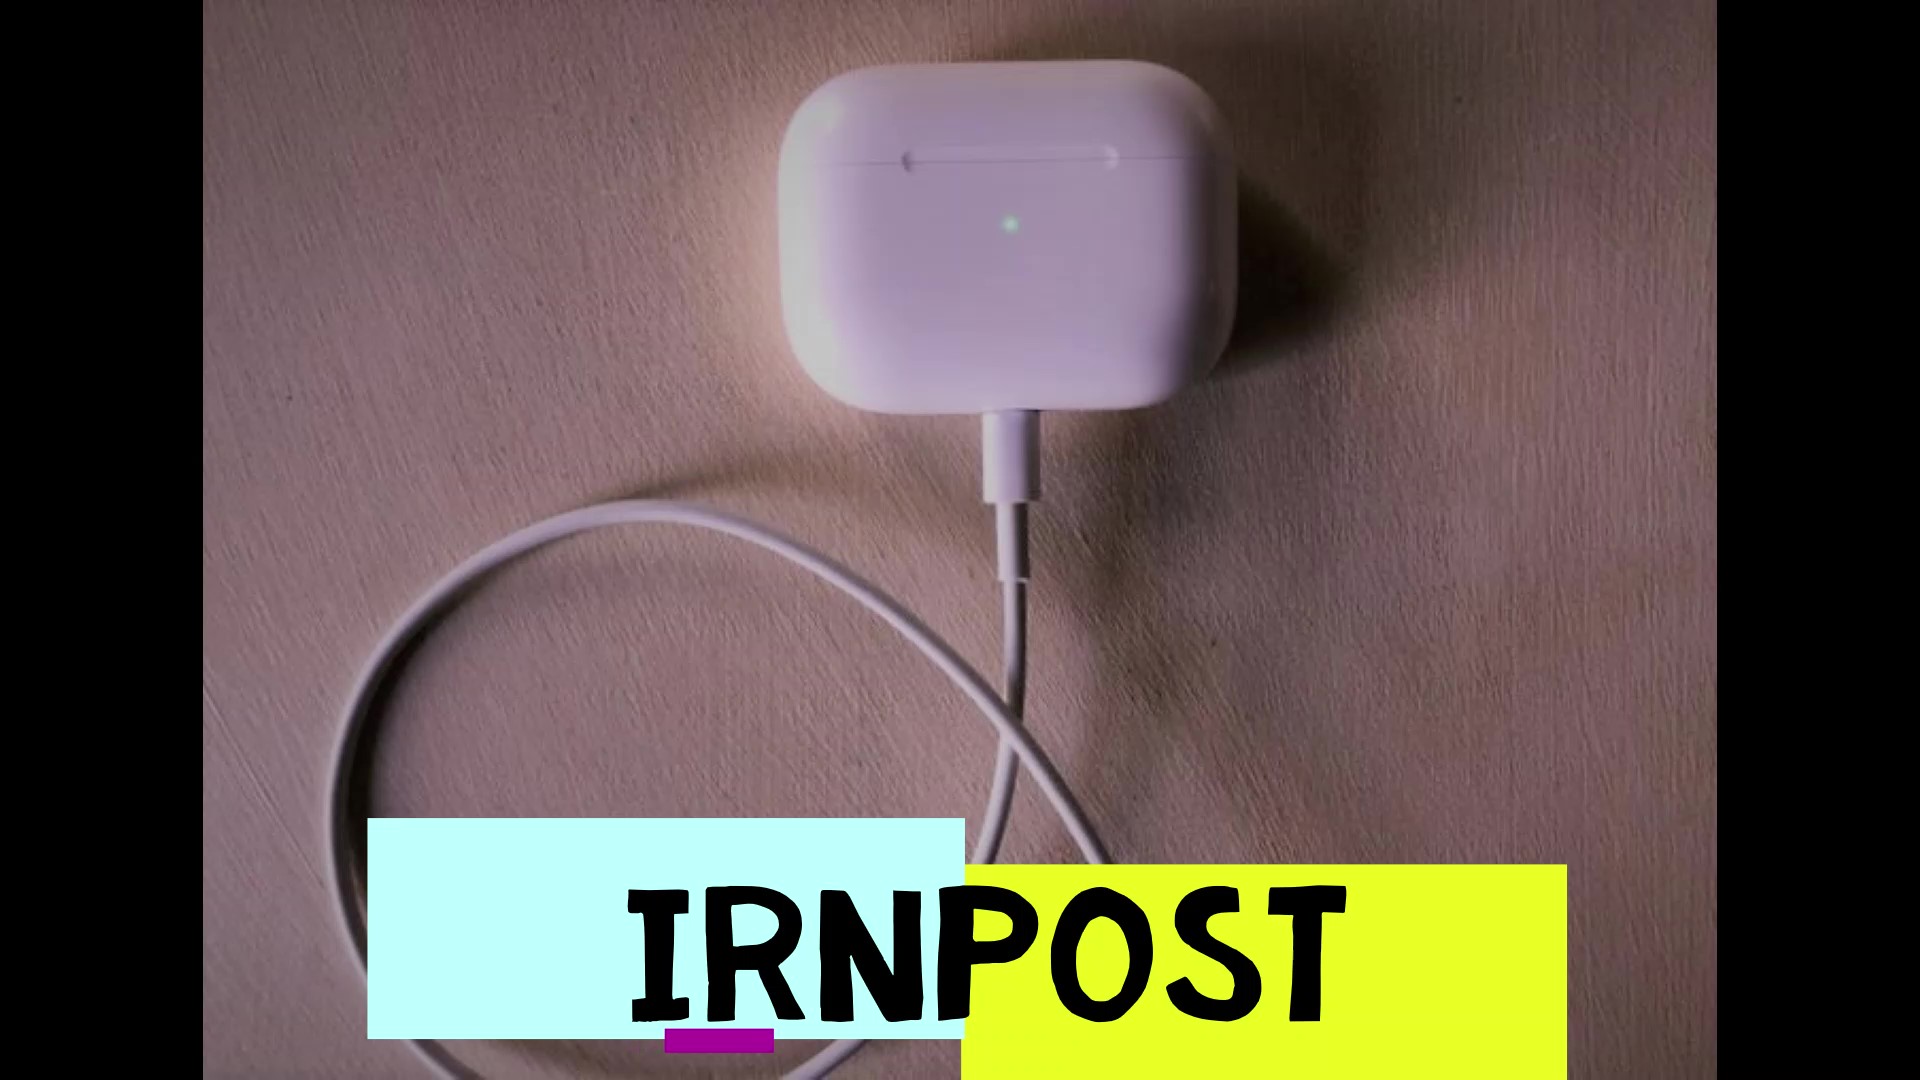 How to Fix Airpods Pro not Charging